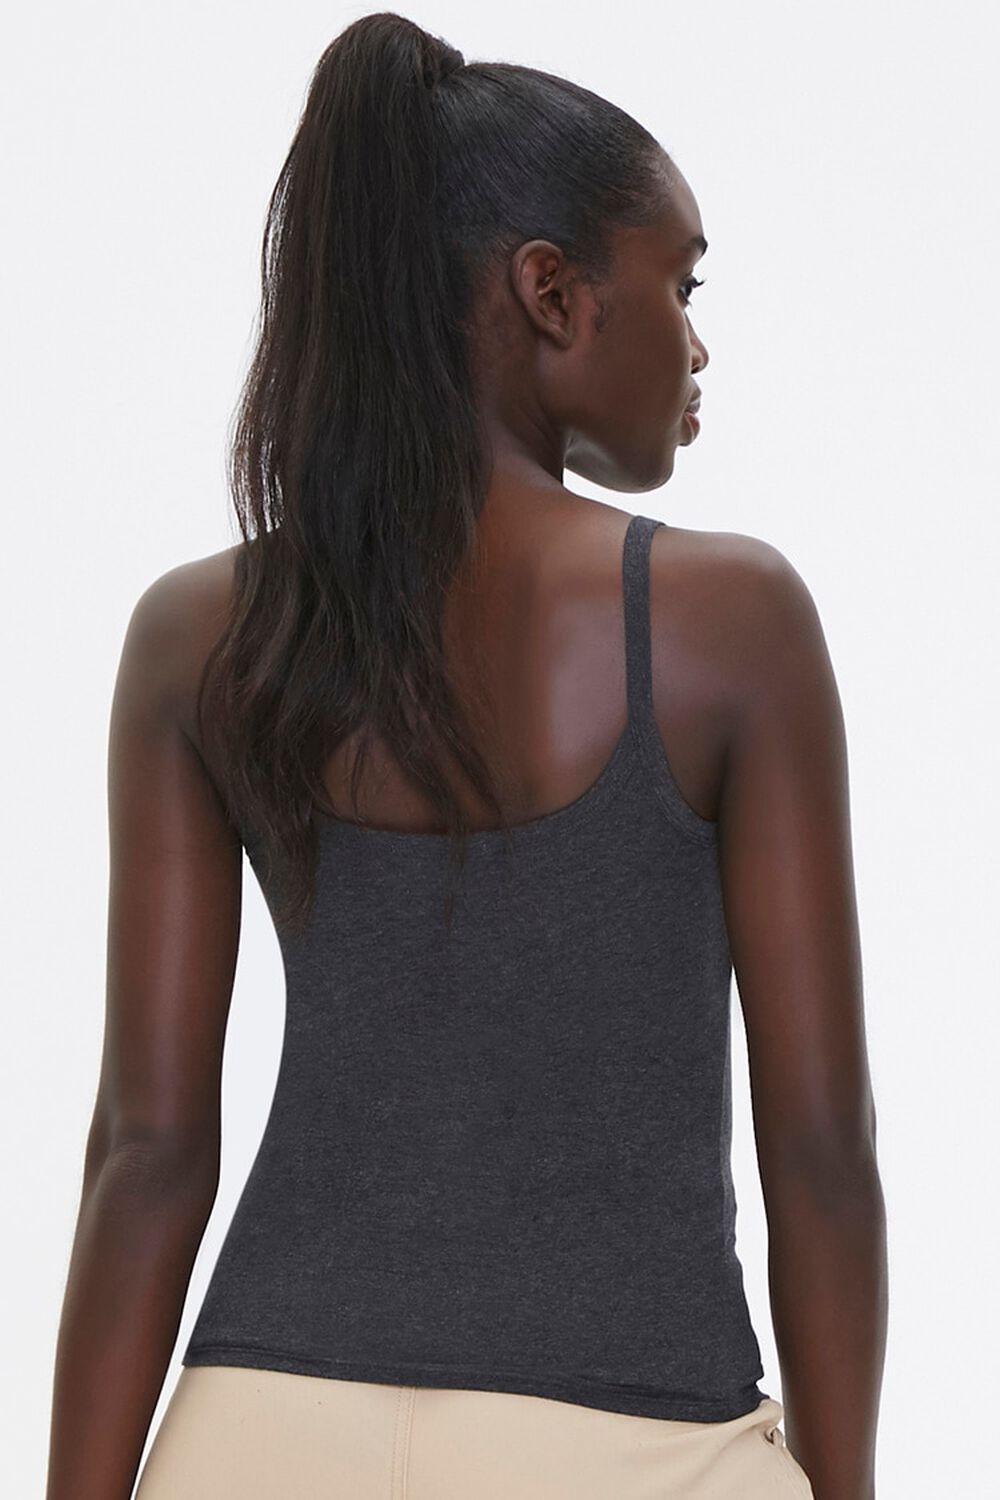 CHARCOAL HEATHER Cotton-Blend Cami, image 3